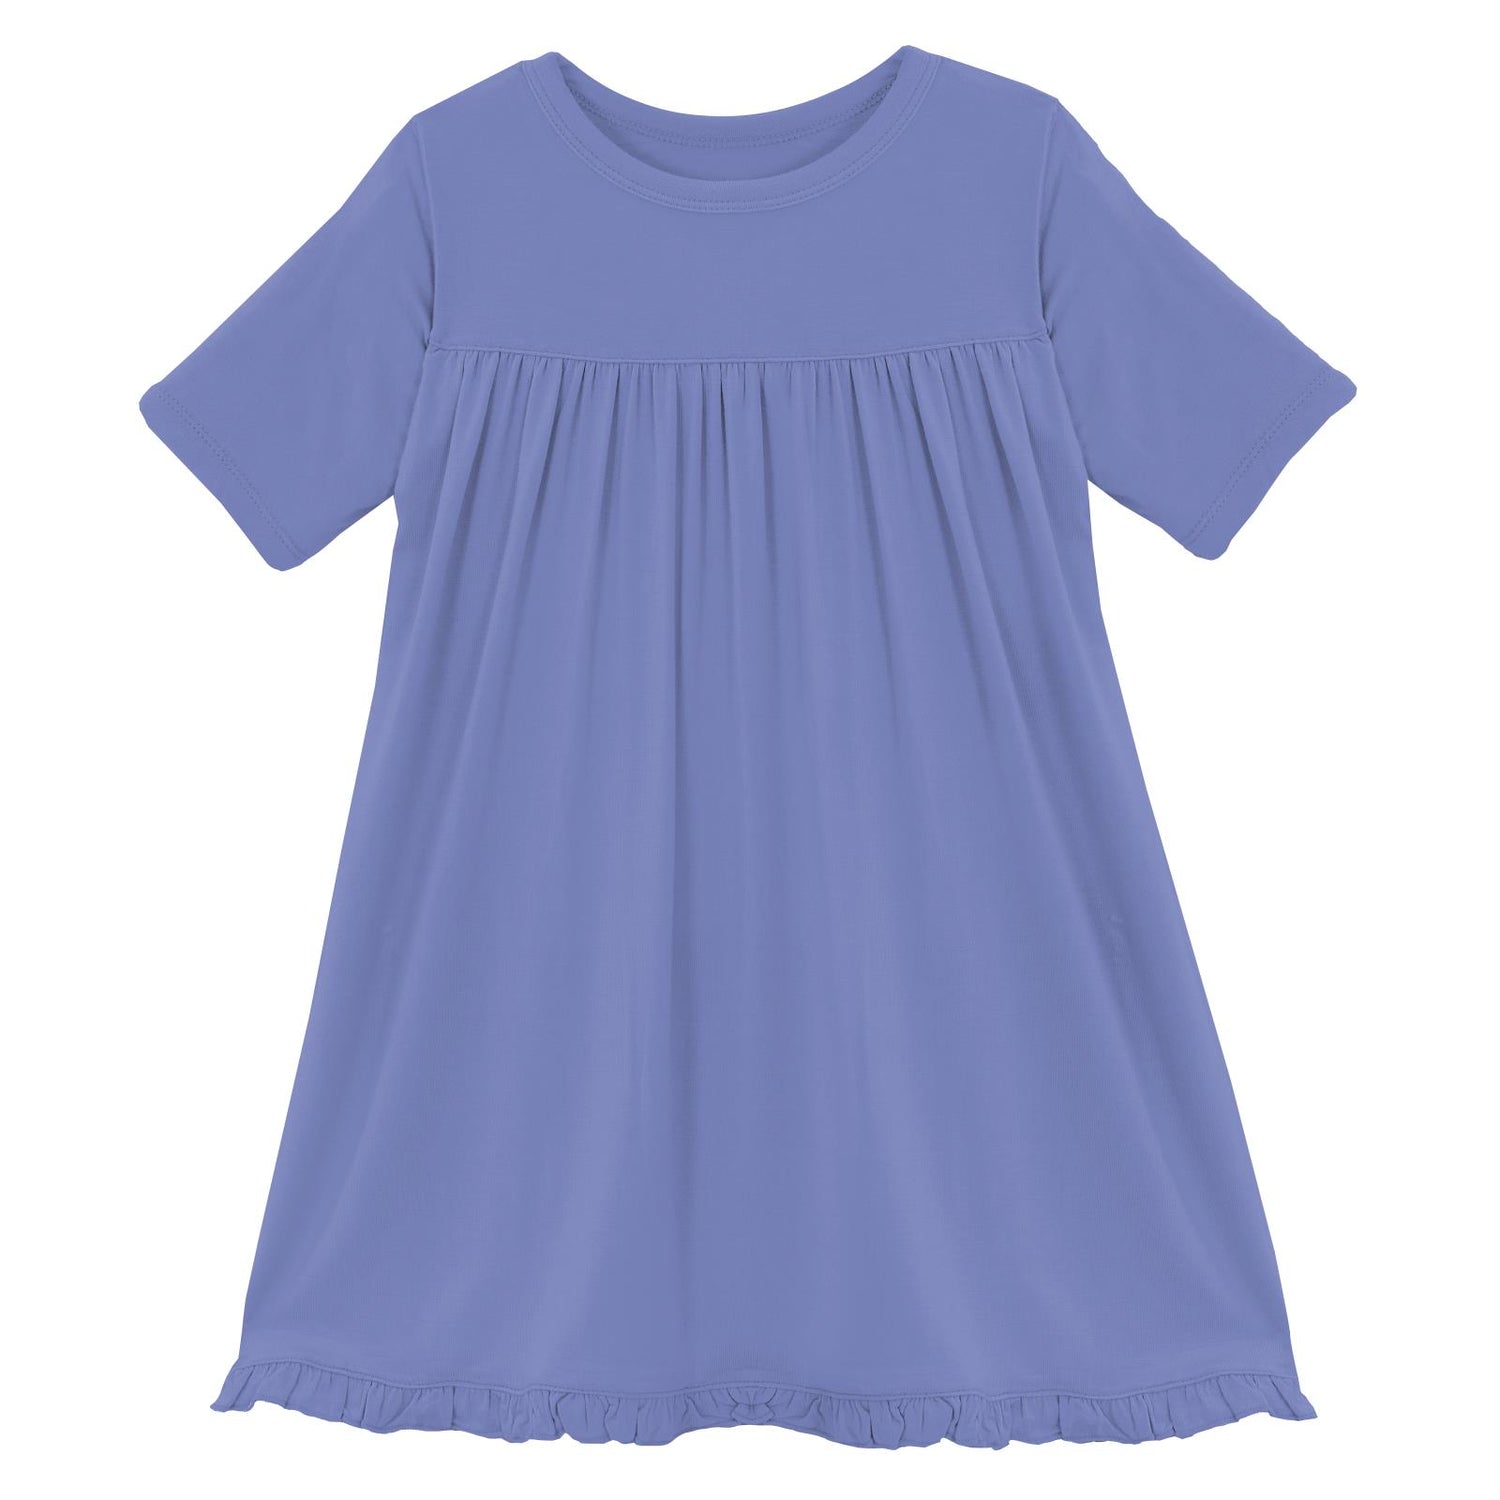 Classic Short Sleeve Swing Dress in Forget Me Not